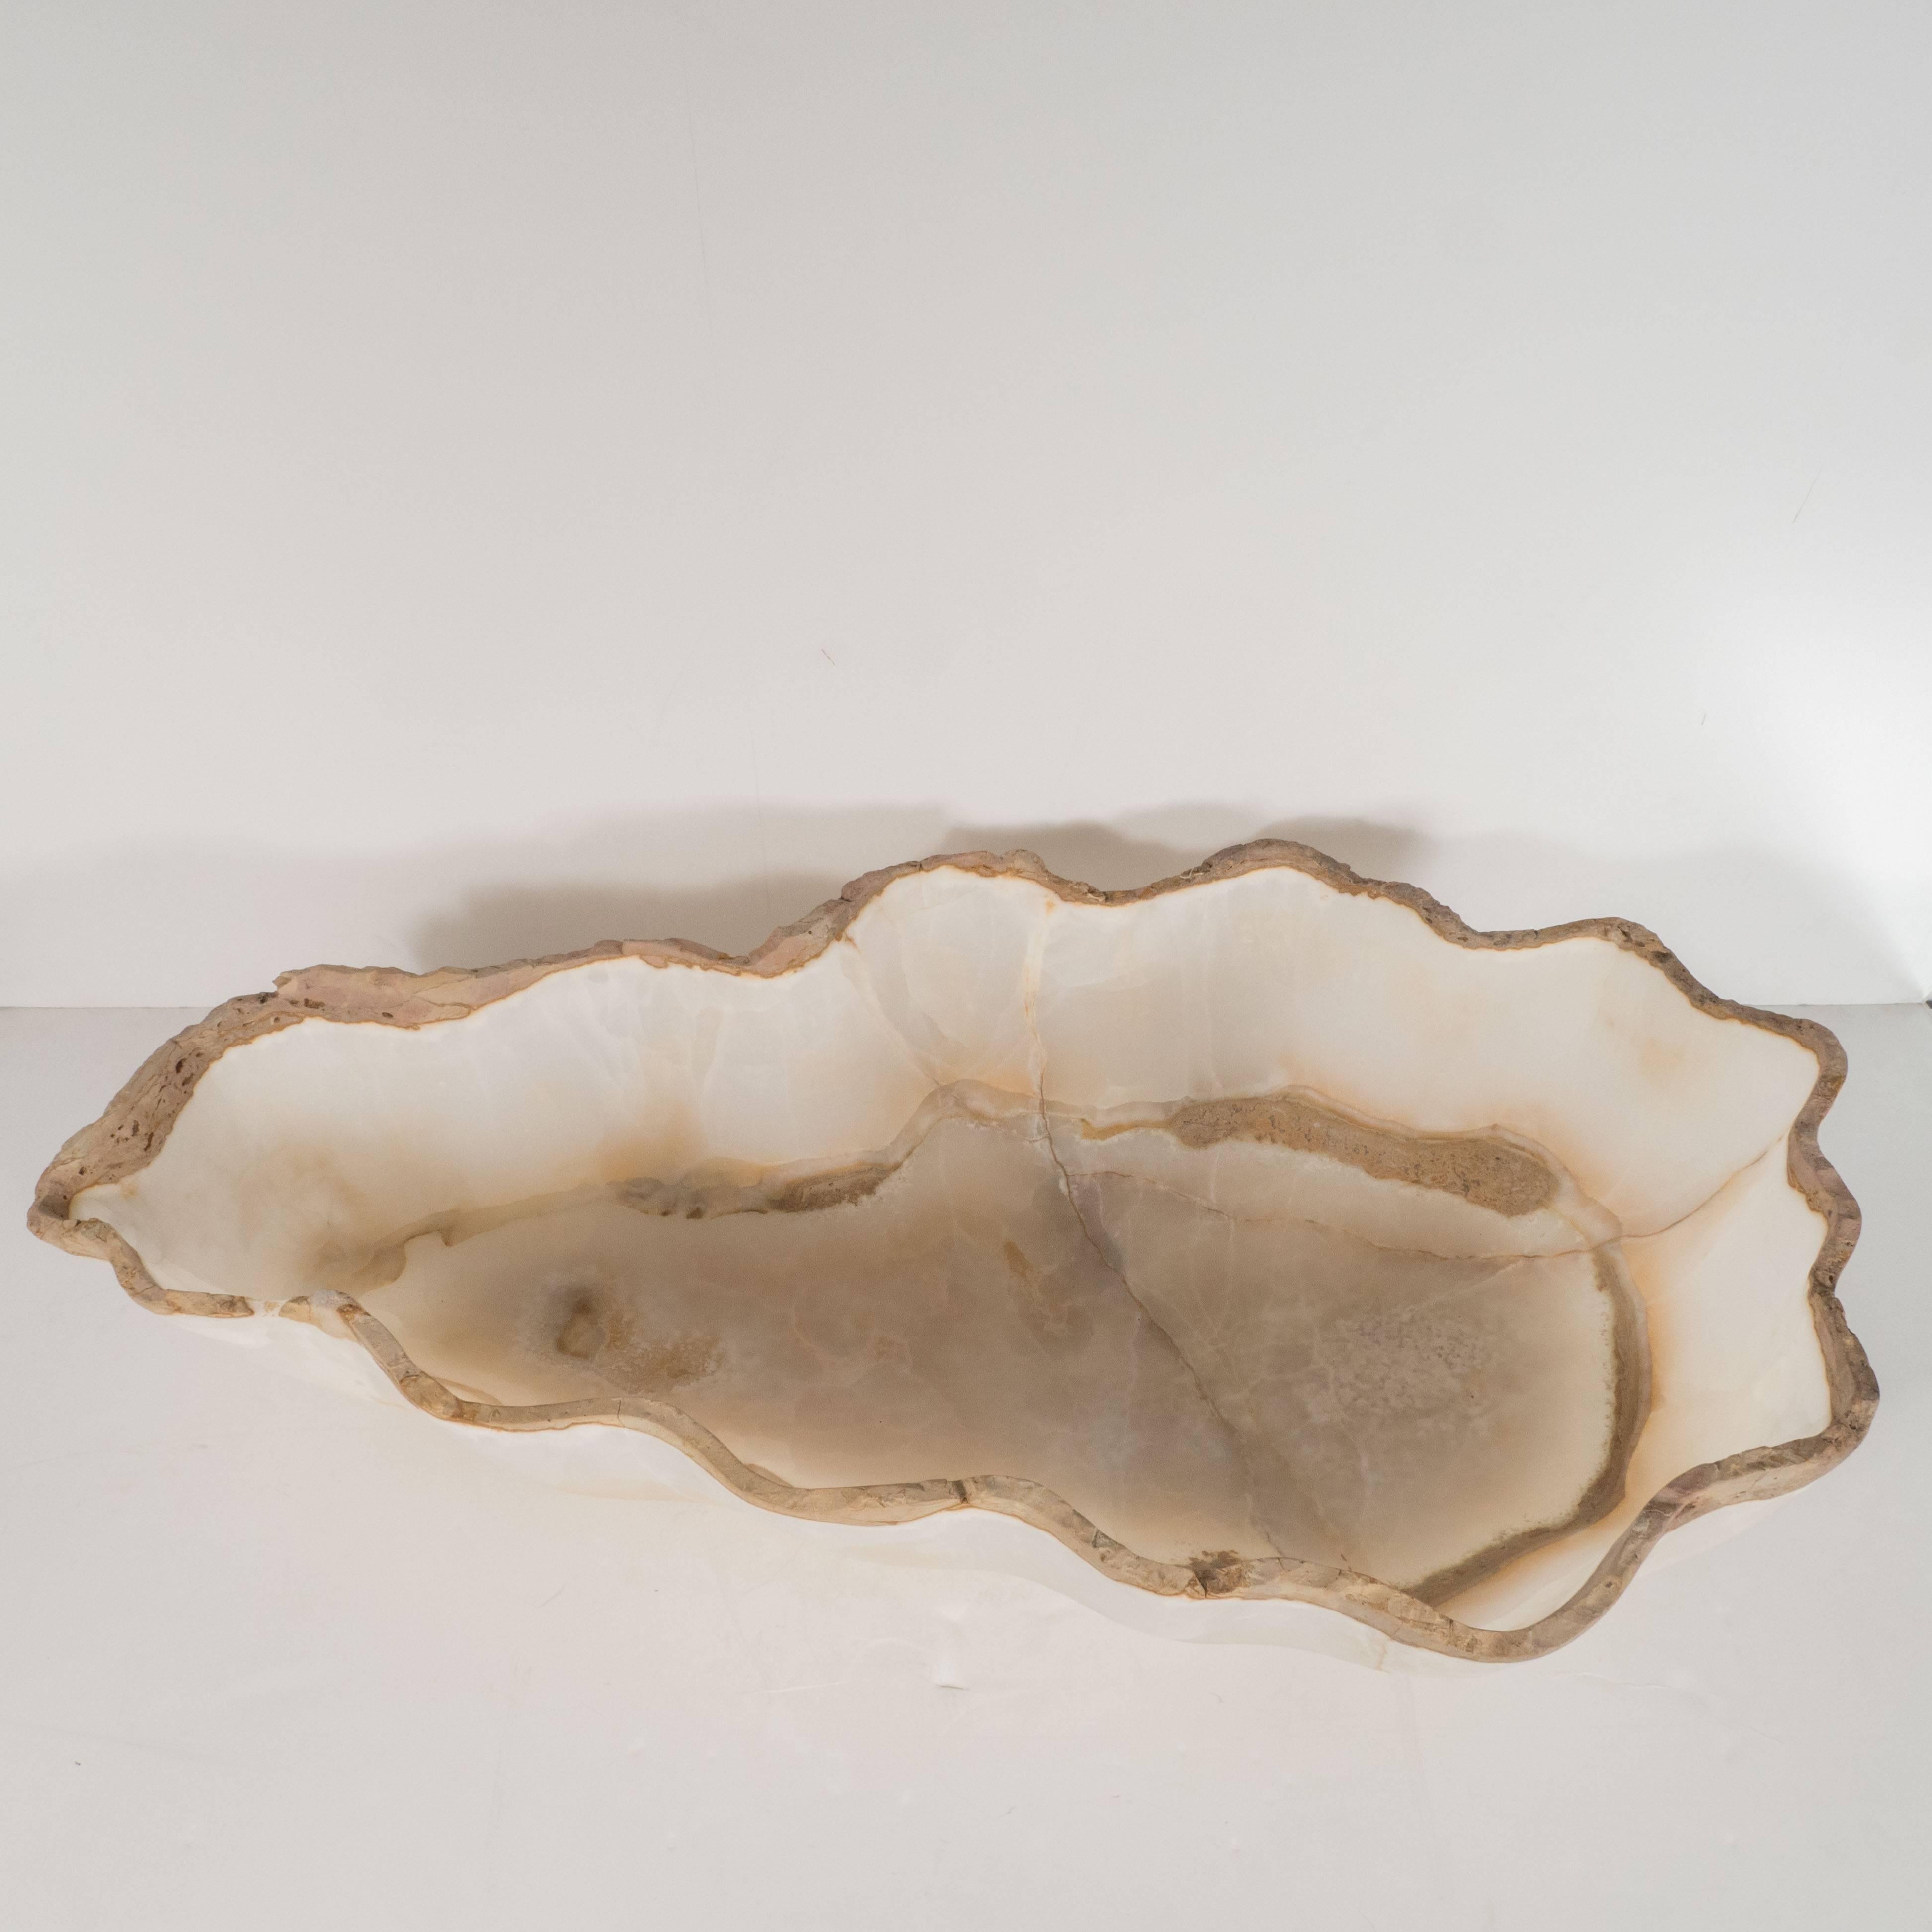 This compelling organic modern agate bowl features a wealth of texture in honeyed tones of sand and oyster shell, showcasing the inherent beauty and understated elegance of nature at its most refined. It would be a winning addition to any style of